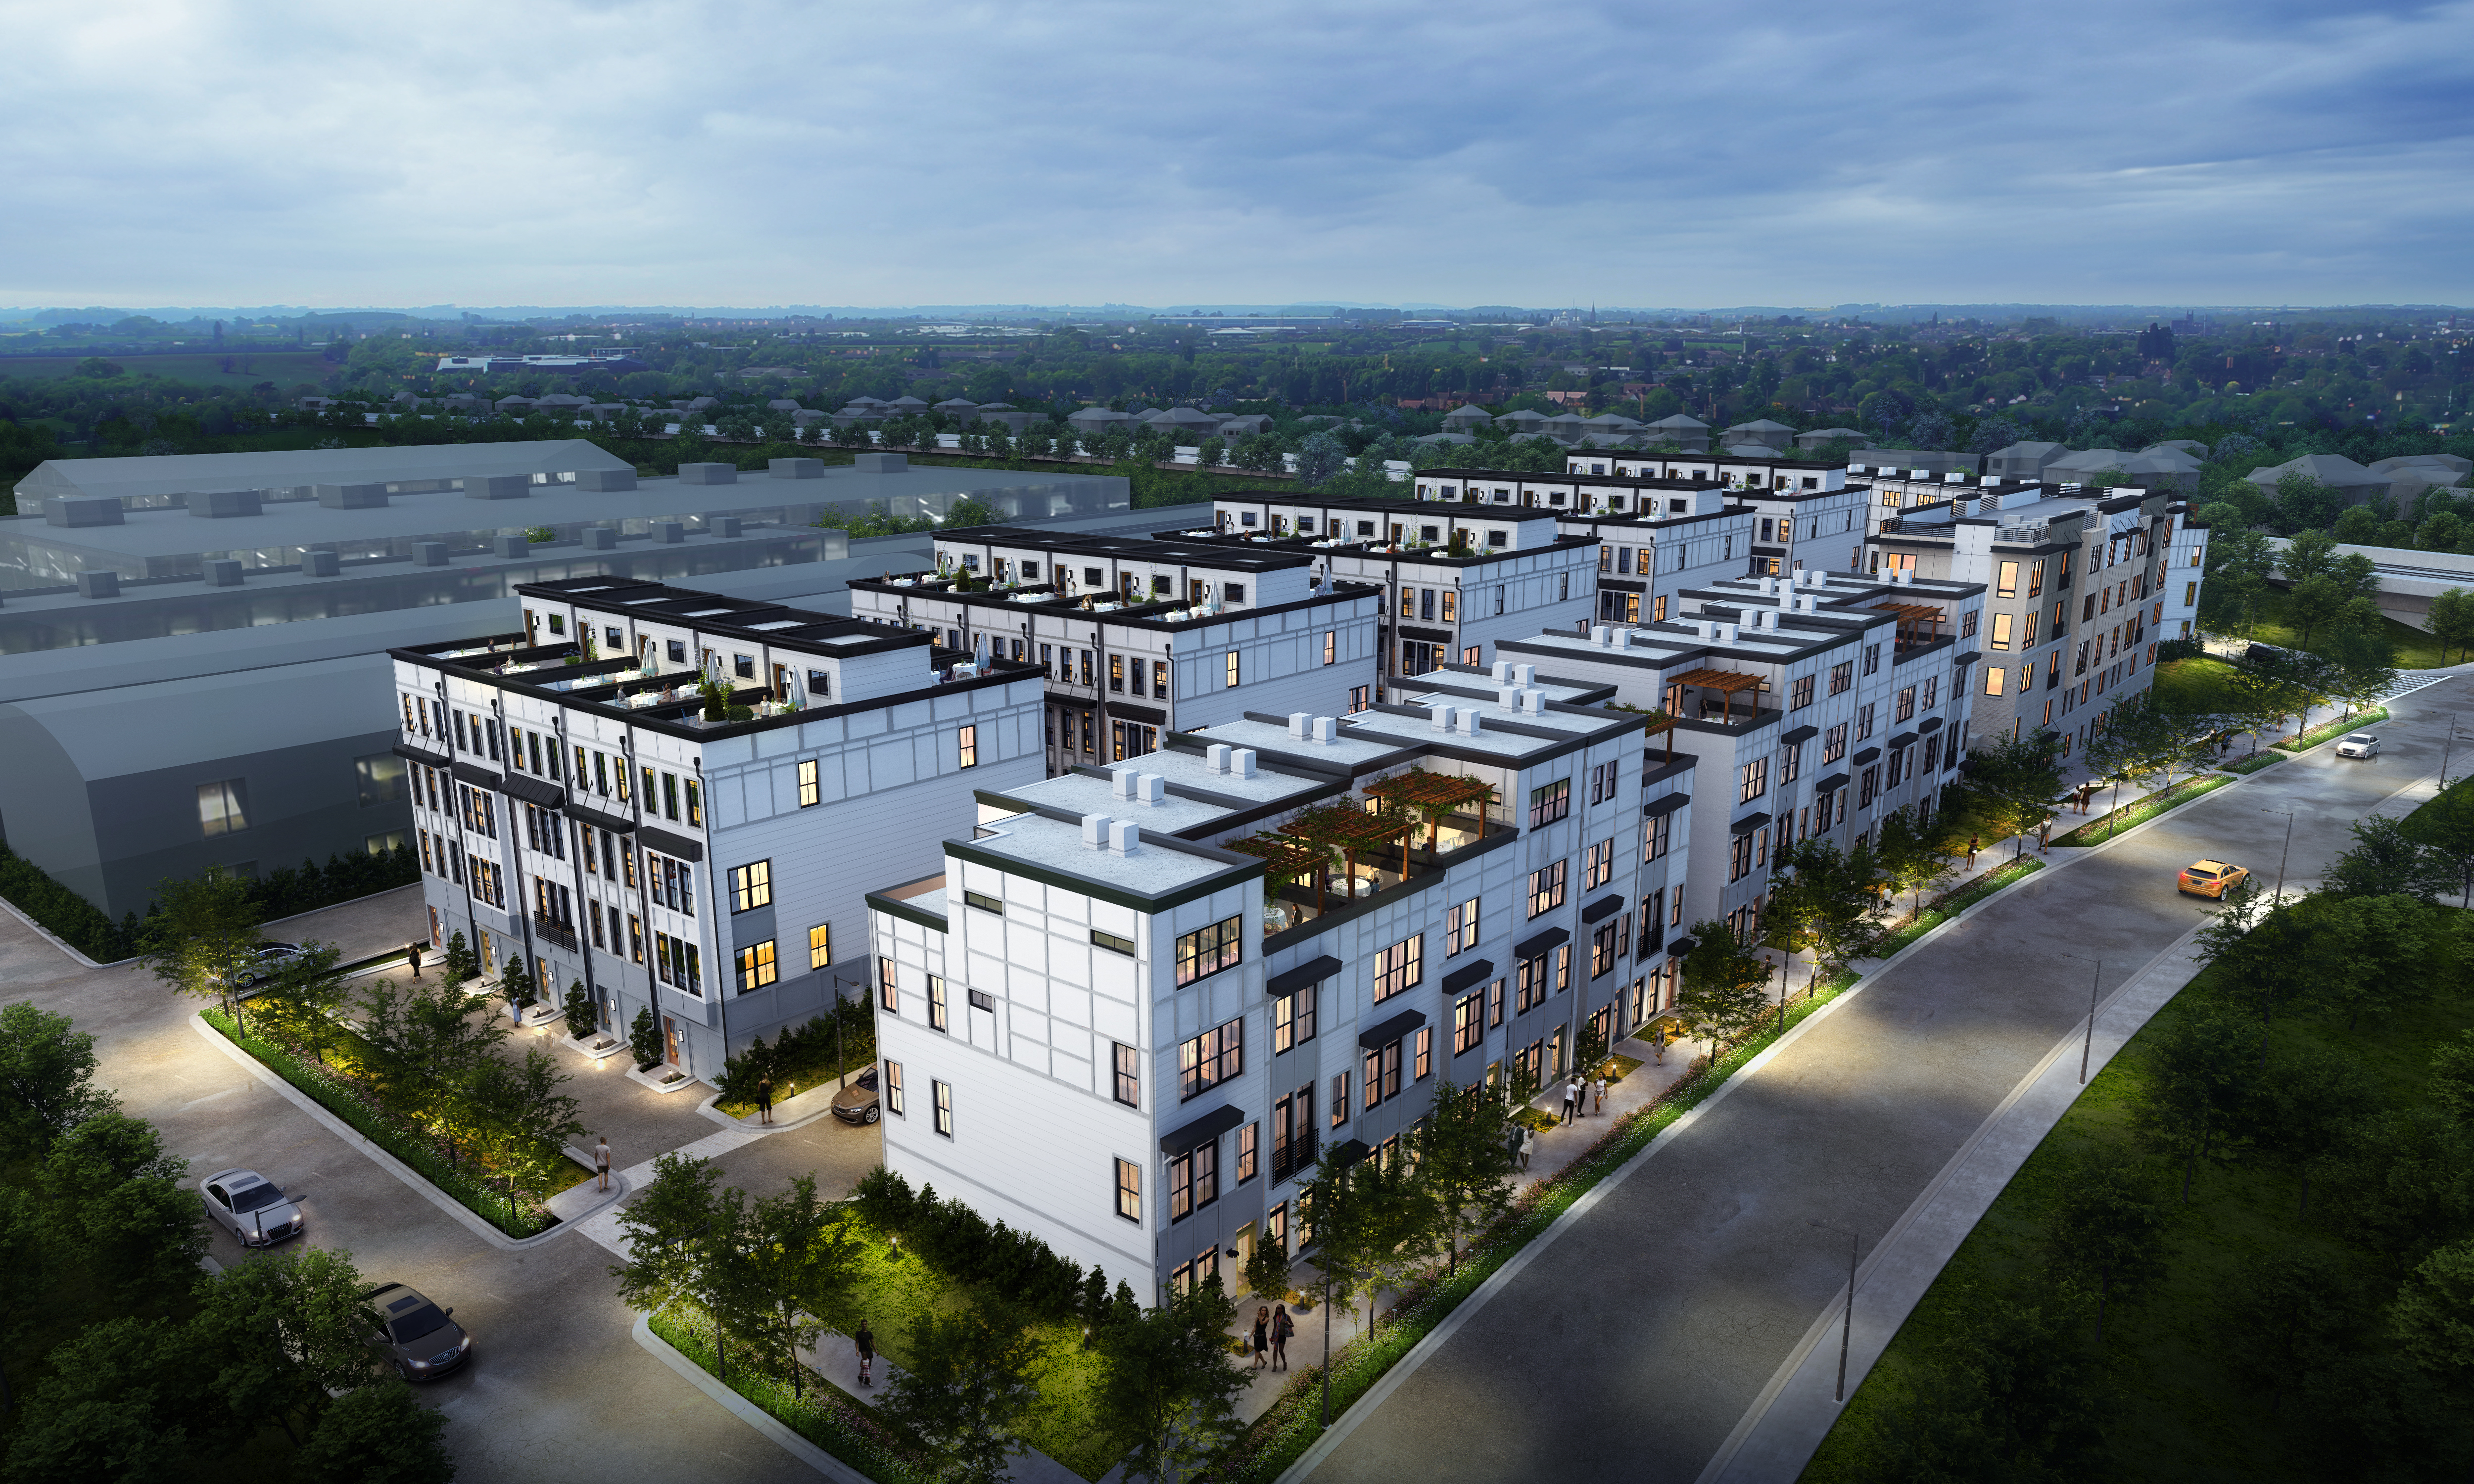 A wide-angle rendering shows how LaFrance Square would fit into the Edgewood landscape.